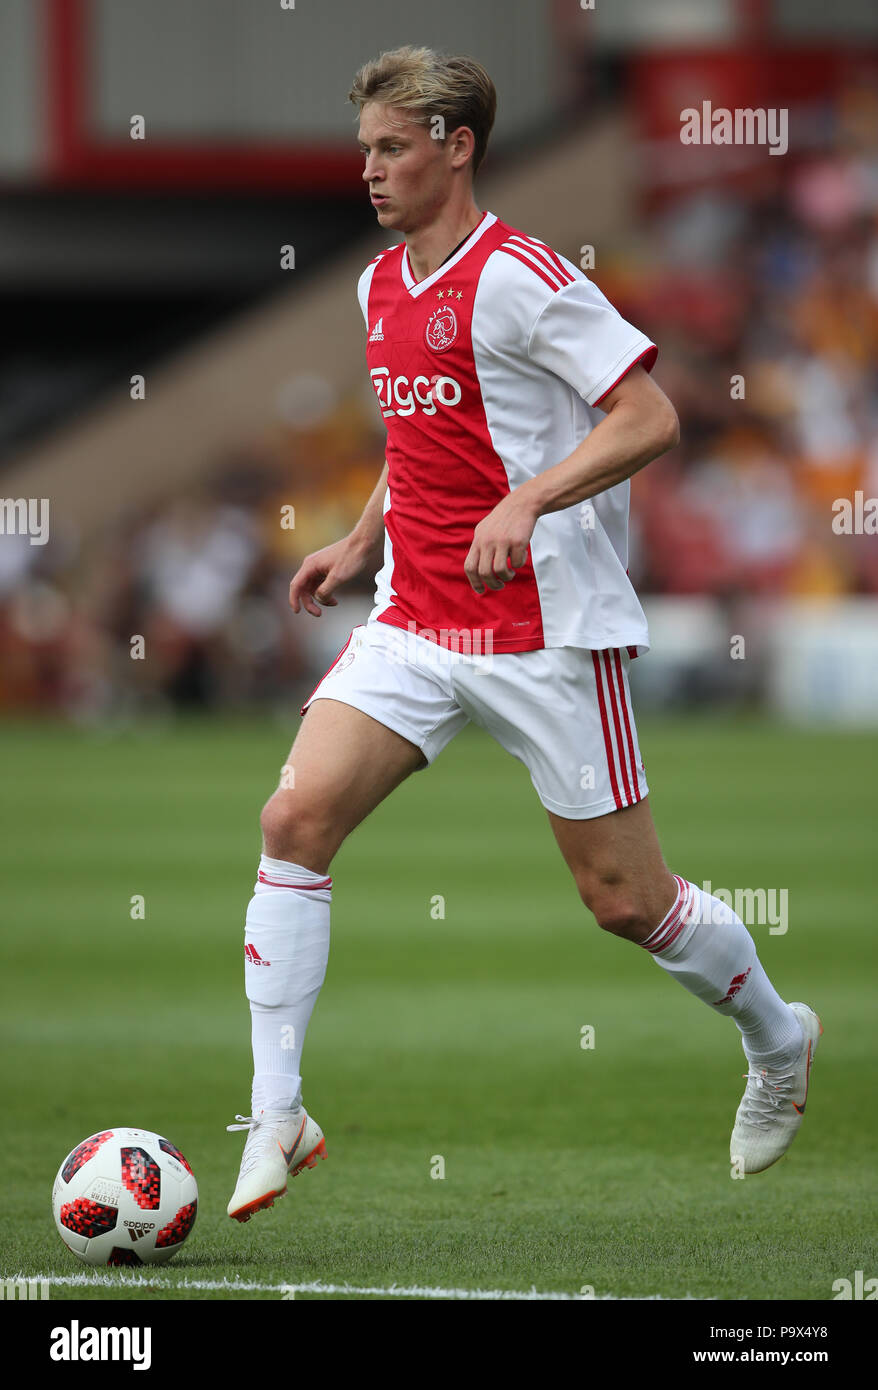 Ajax's Frenkie de Jong during a pre season friendly match at the Banks's Stadium, Walsall. PRESS ASSOCIATION Photo. Picture date: Thursday July 19, 2018. Photo credit should read: Nick Potts/PA Wire. EDITORIAL USE ONLY No use with unauthorised audio, video, data, fixture lists, club/league logos or 'live' services. Online in-match use limited to 75 images, no video emulation. No use in betting, games or single club/league/player publications. Stock Photo